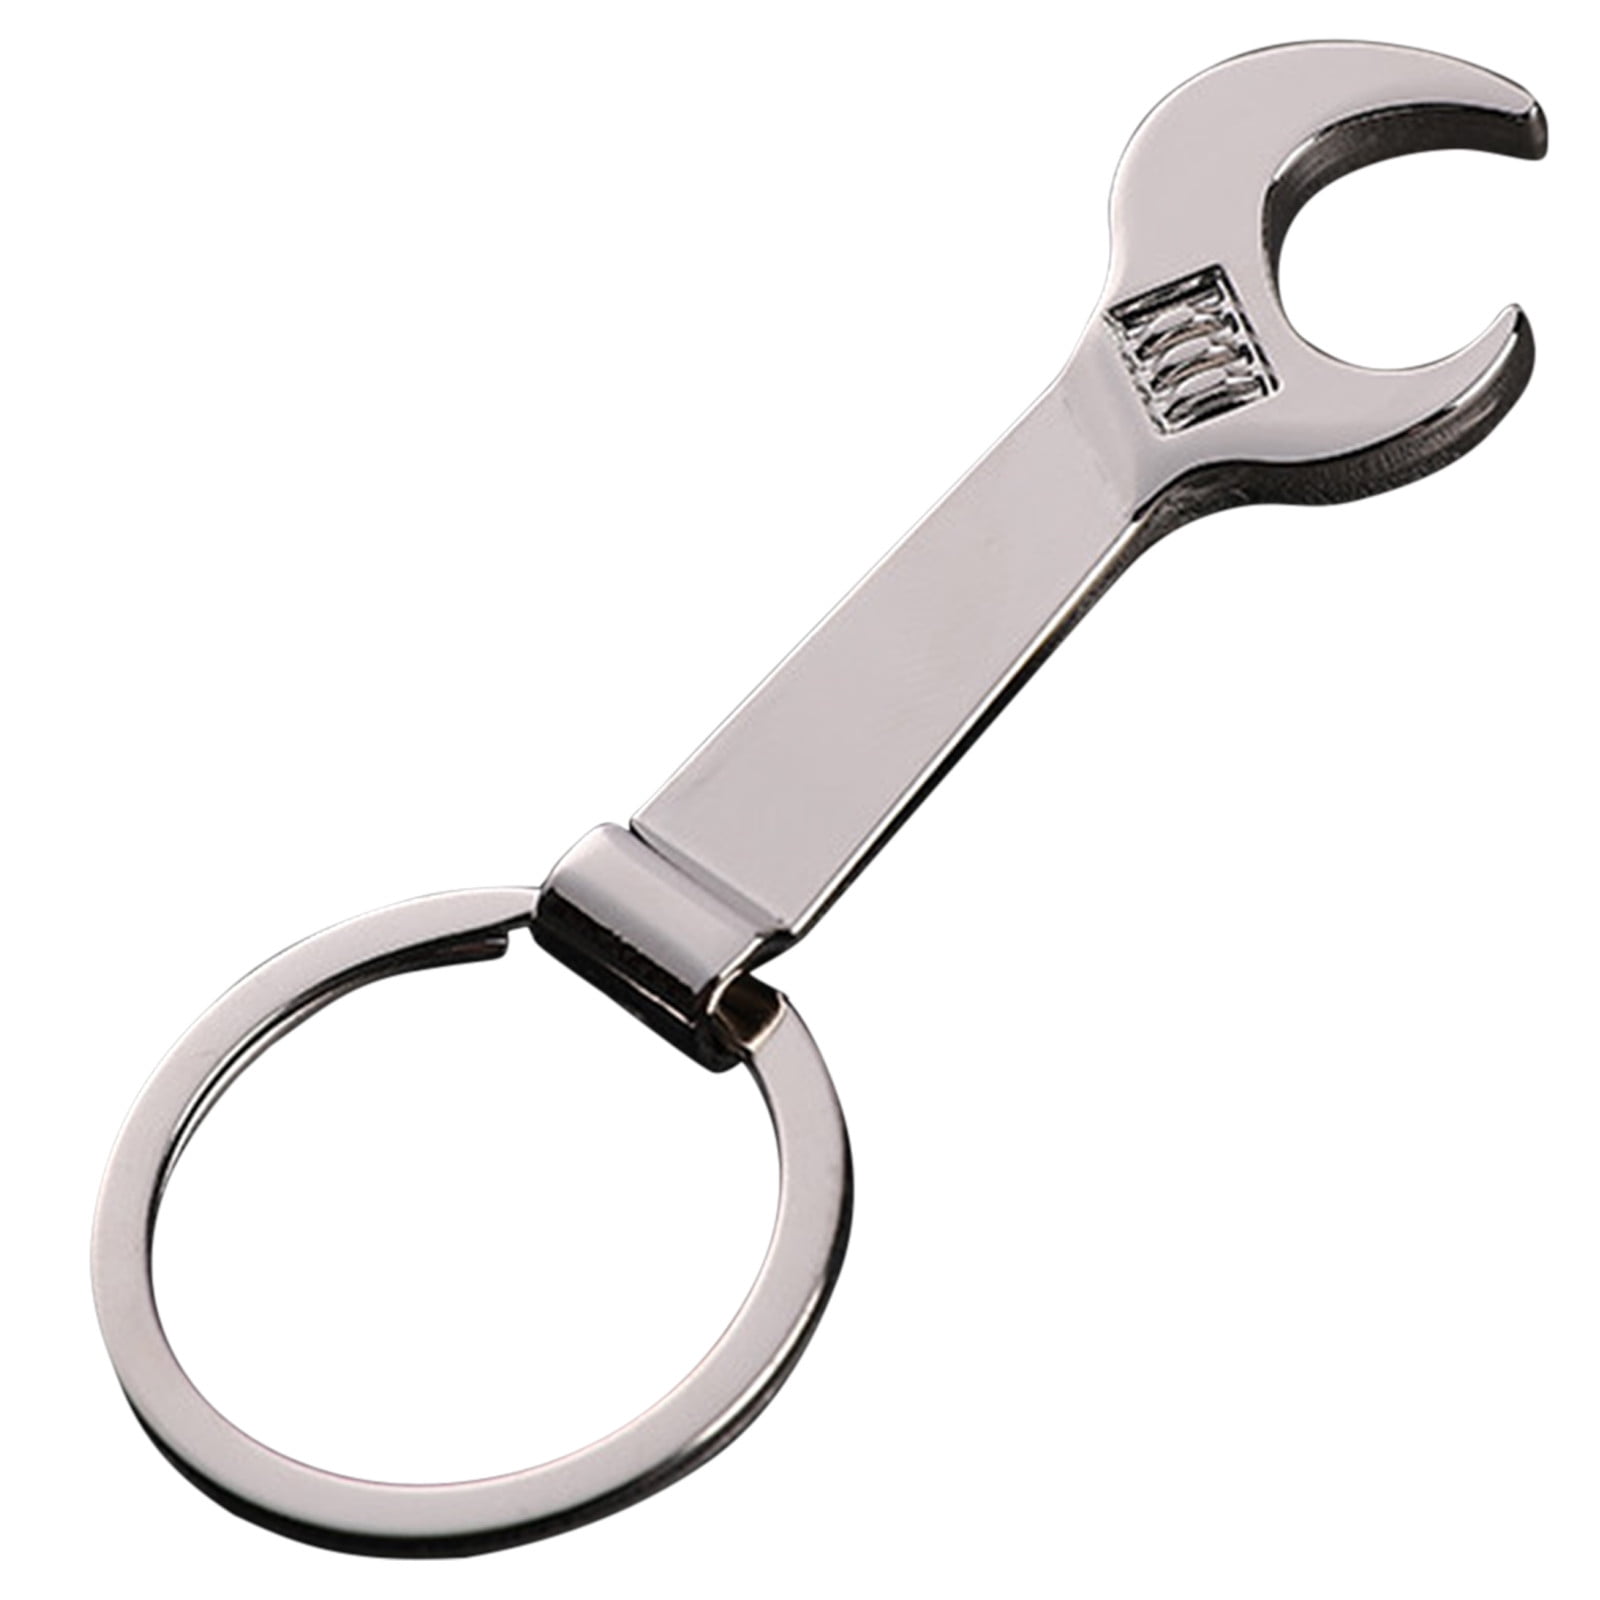 Stainless steel Adjustable Creative  Wrench Spanner Key Chain Ring Keyring Tool 